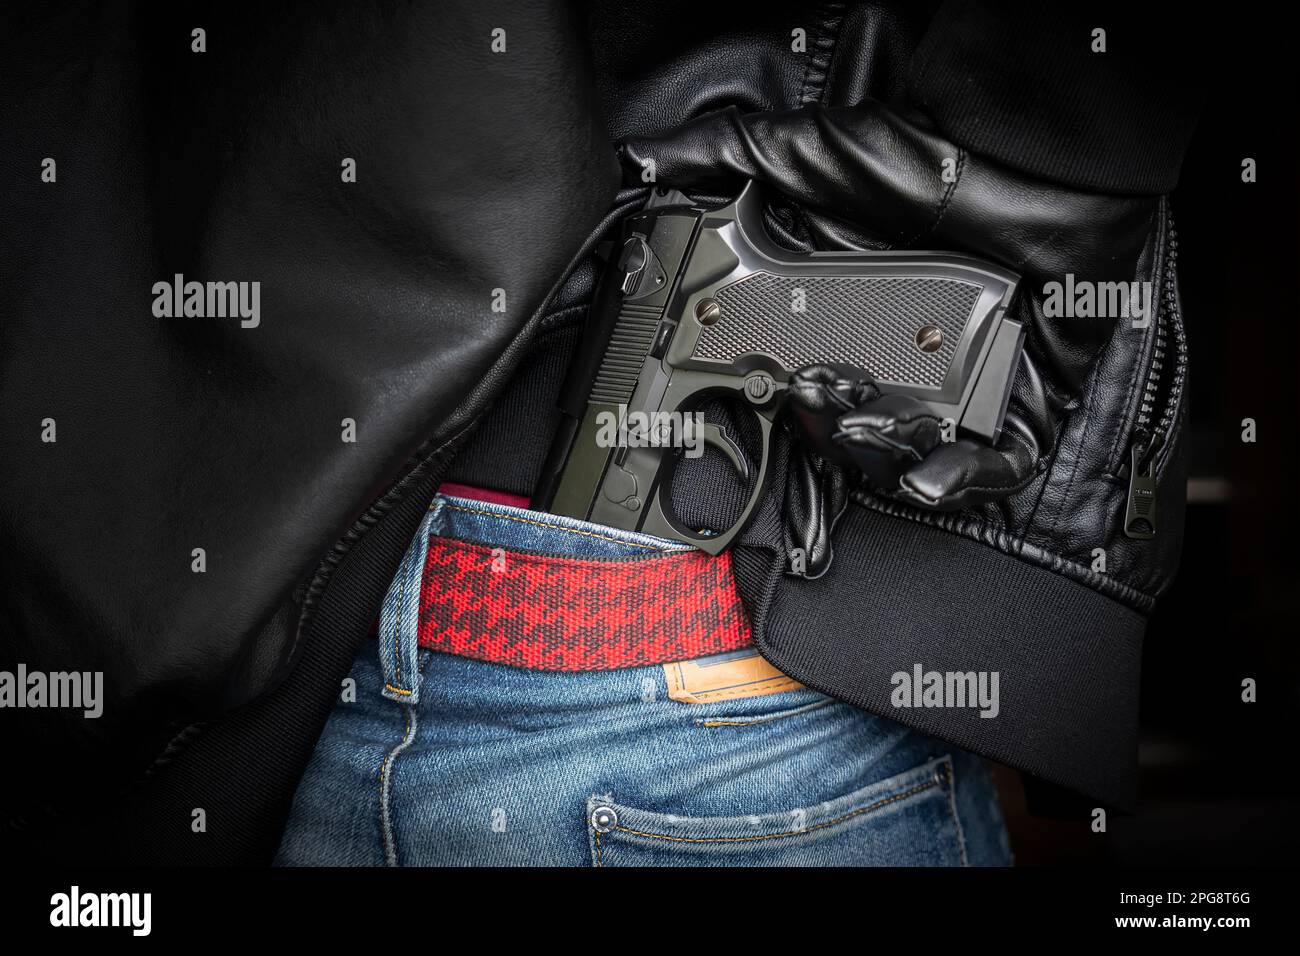 A man, policeman or robber, gangster concealing his gun behind his back. The shooter pulls out a firearm from under a black leather jacket. Stock Photo